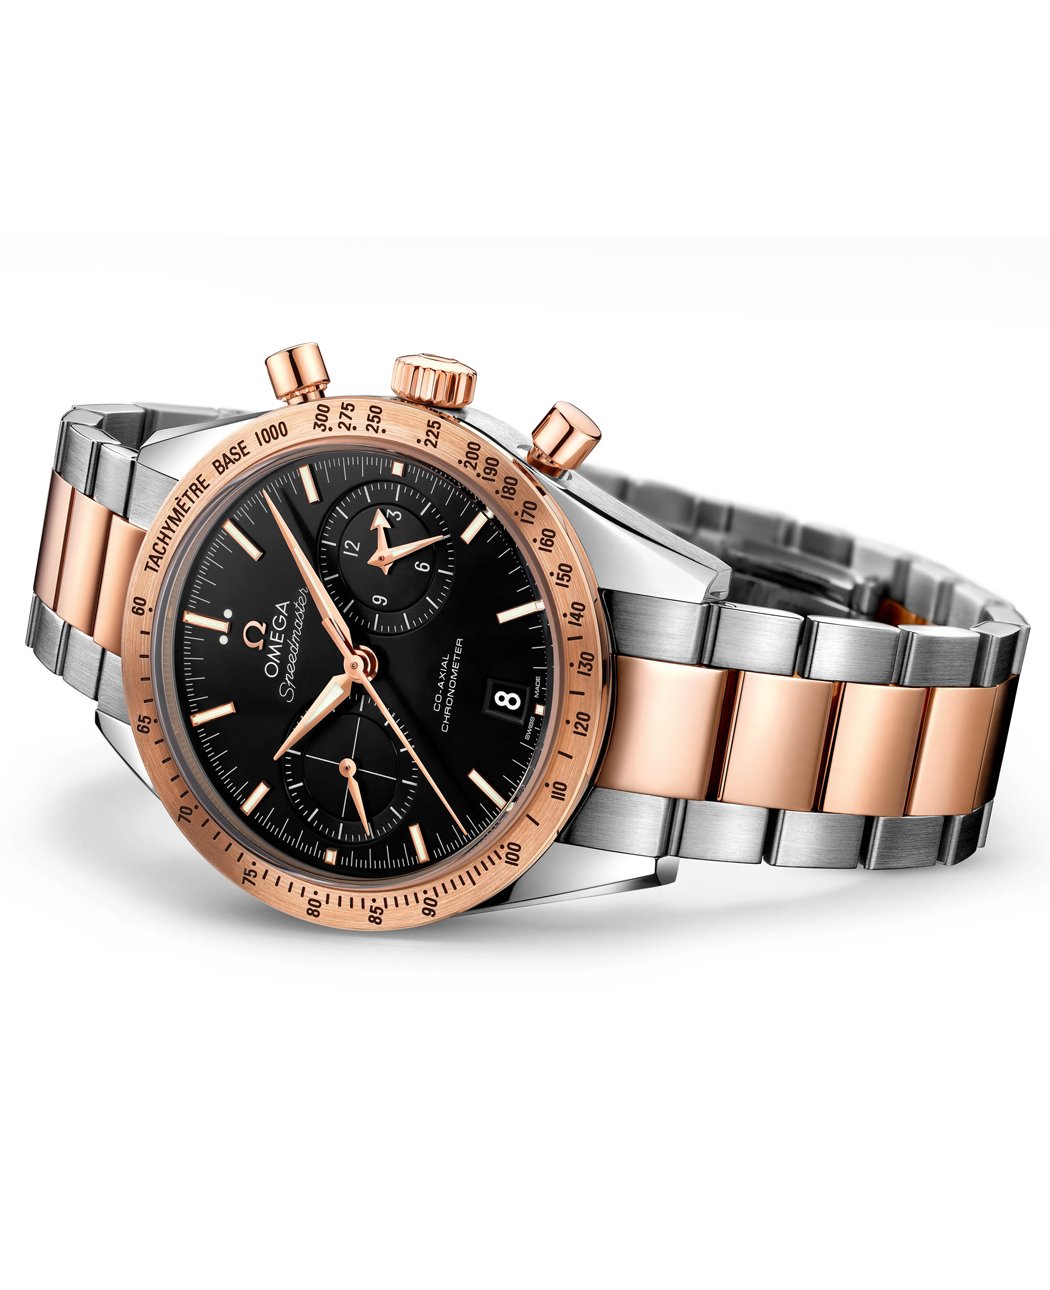 SPEEDMASTER '57 CO-AXIAL CHRONOGRAPH by Omega